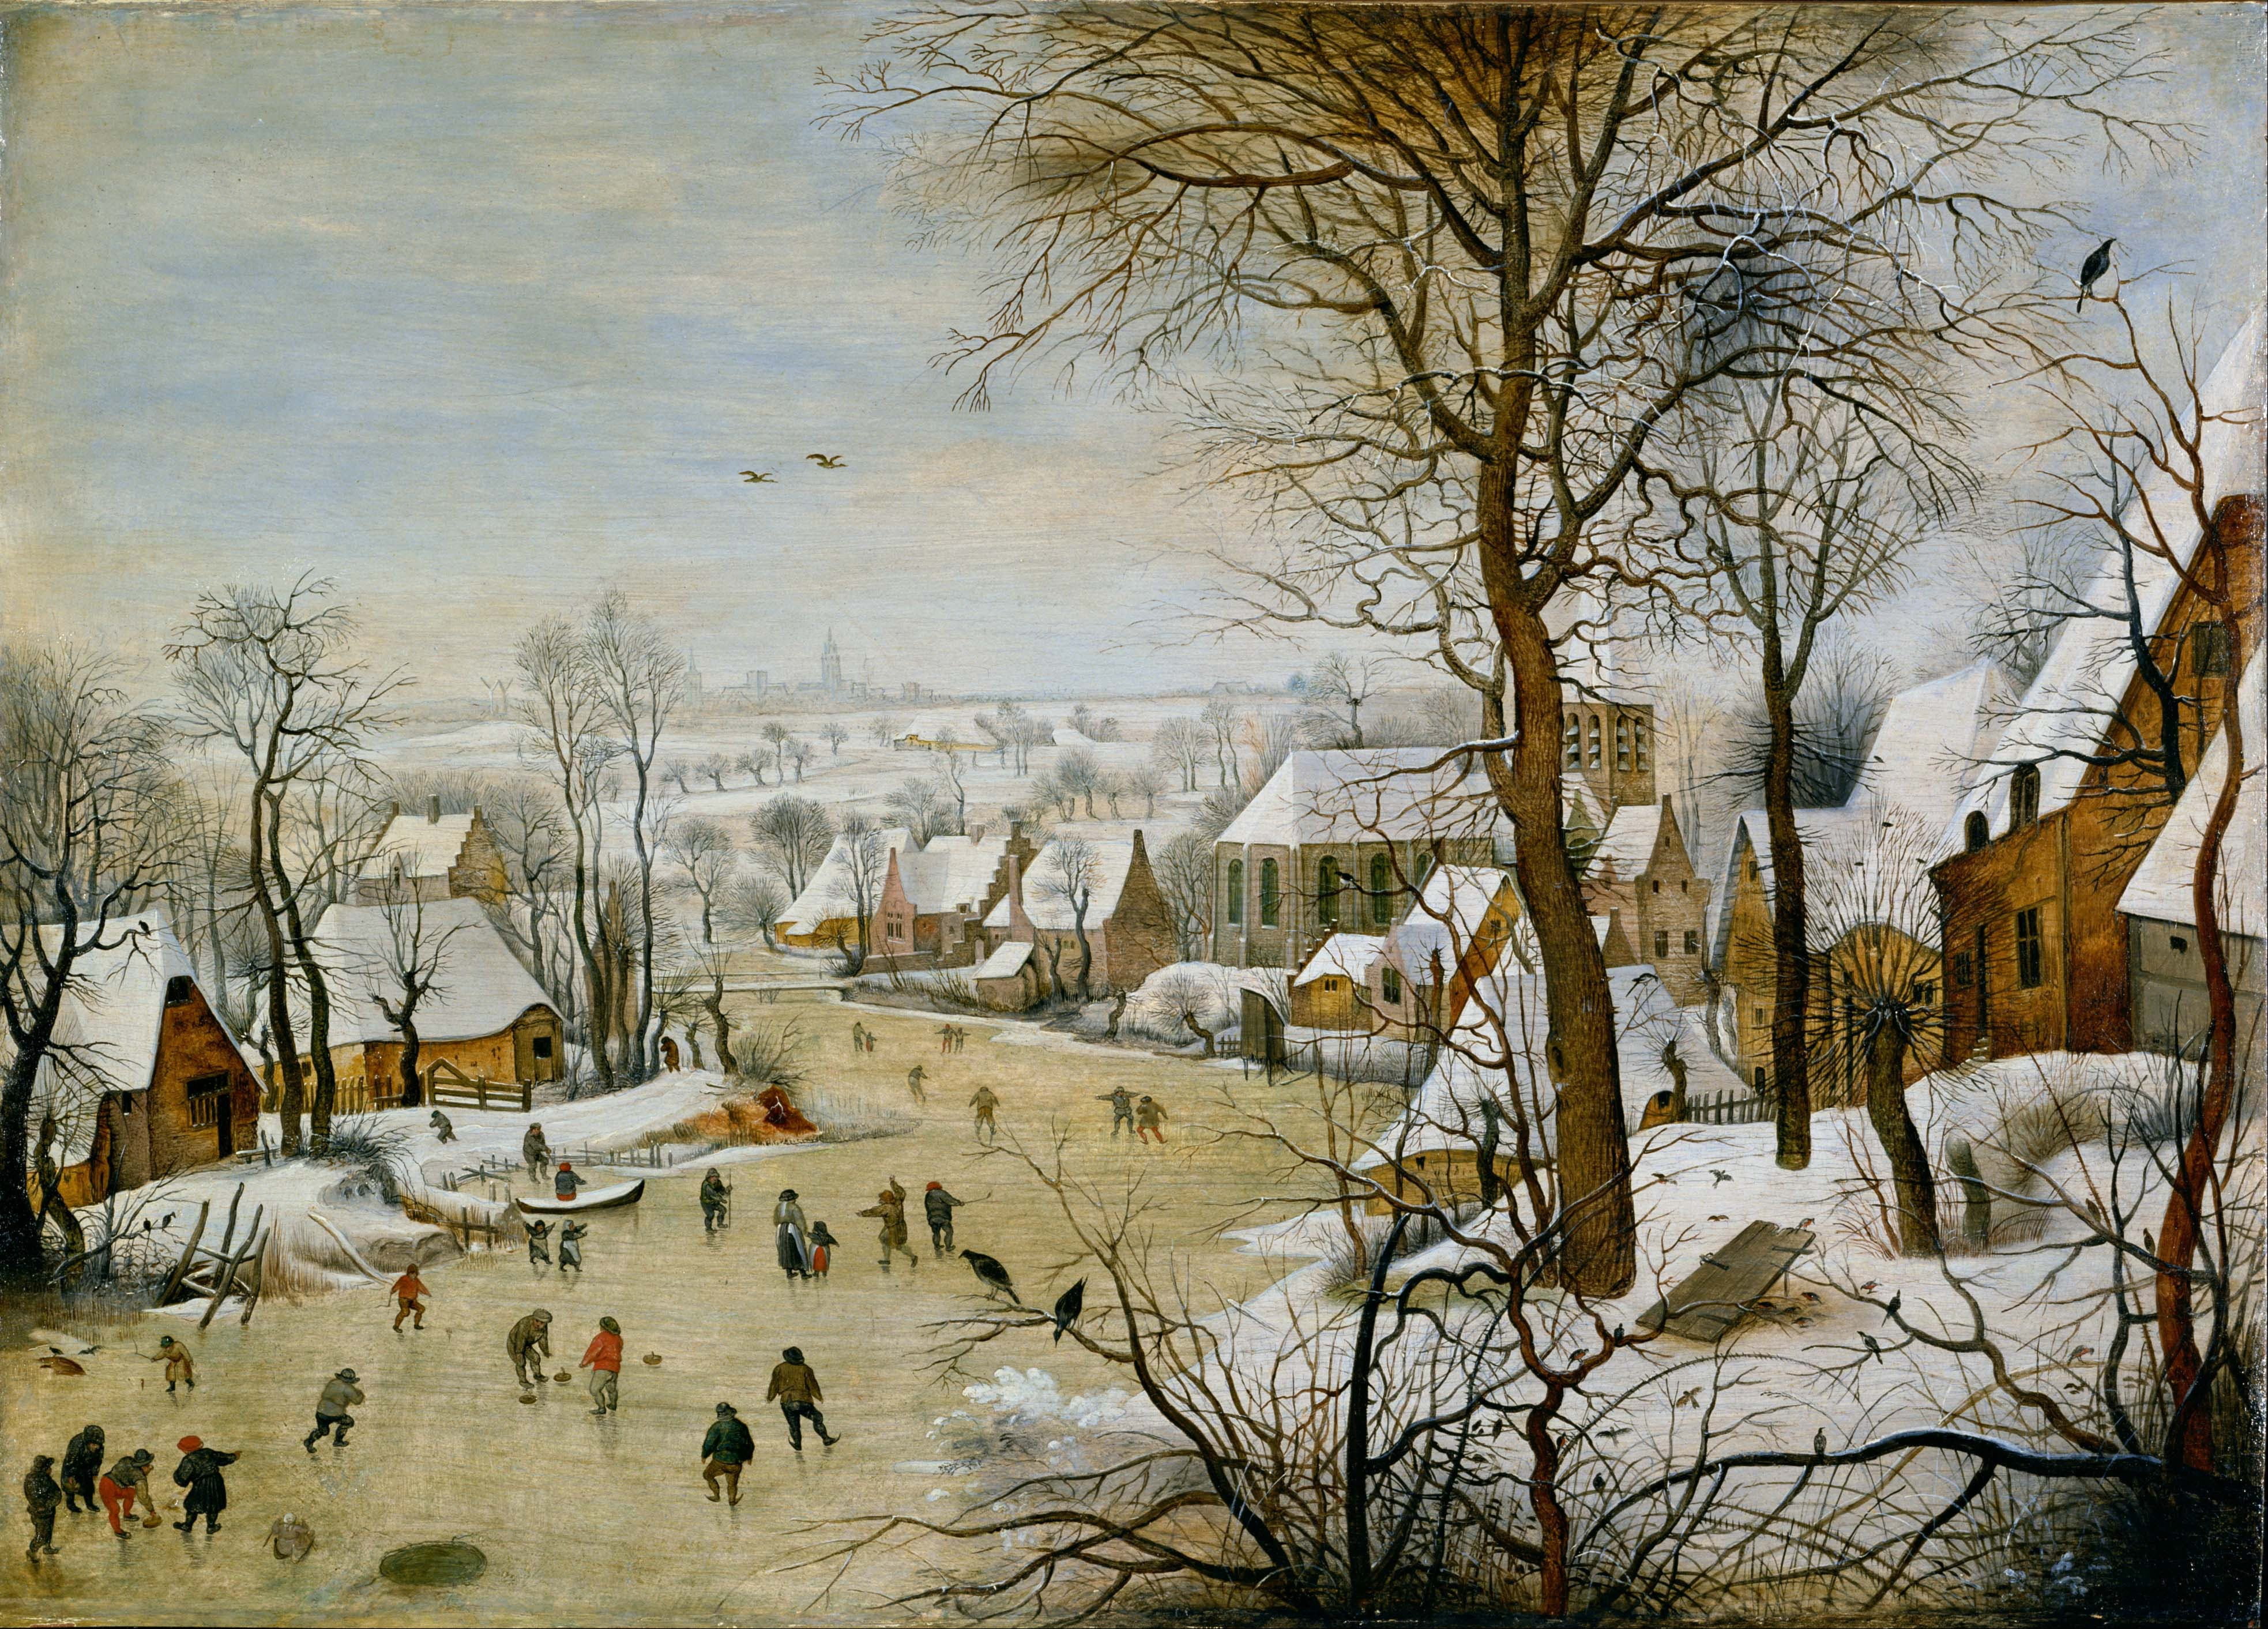 Winter Landscape with Bird-trap by Pieter Brueghel the Younger - 1631 - 56.5 x 39 cm Muzeul Național Brukenthal